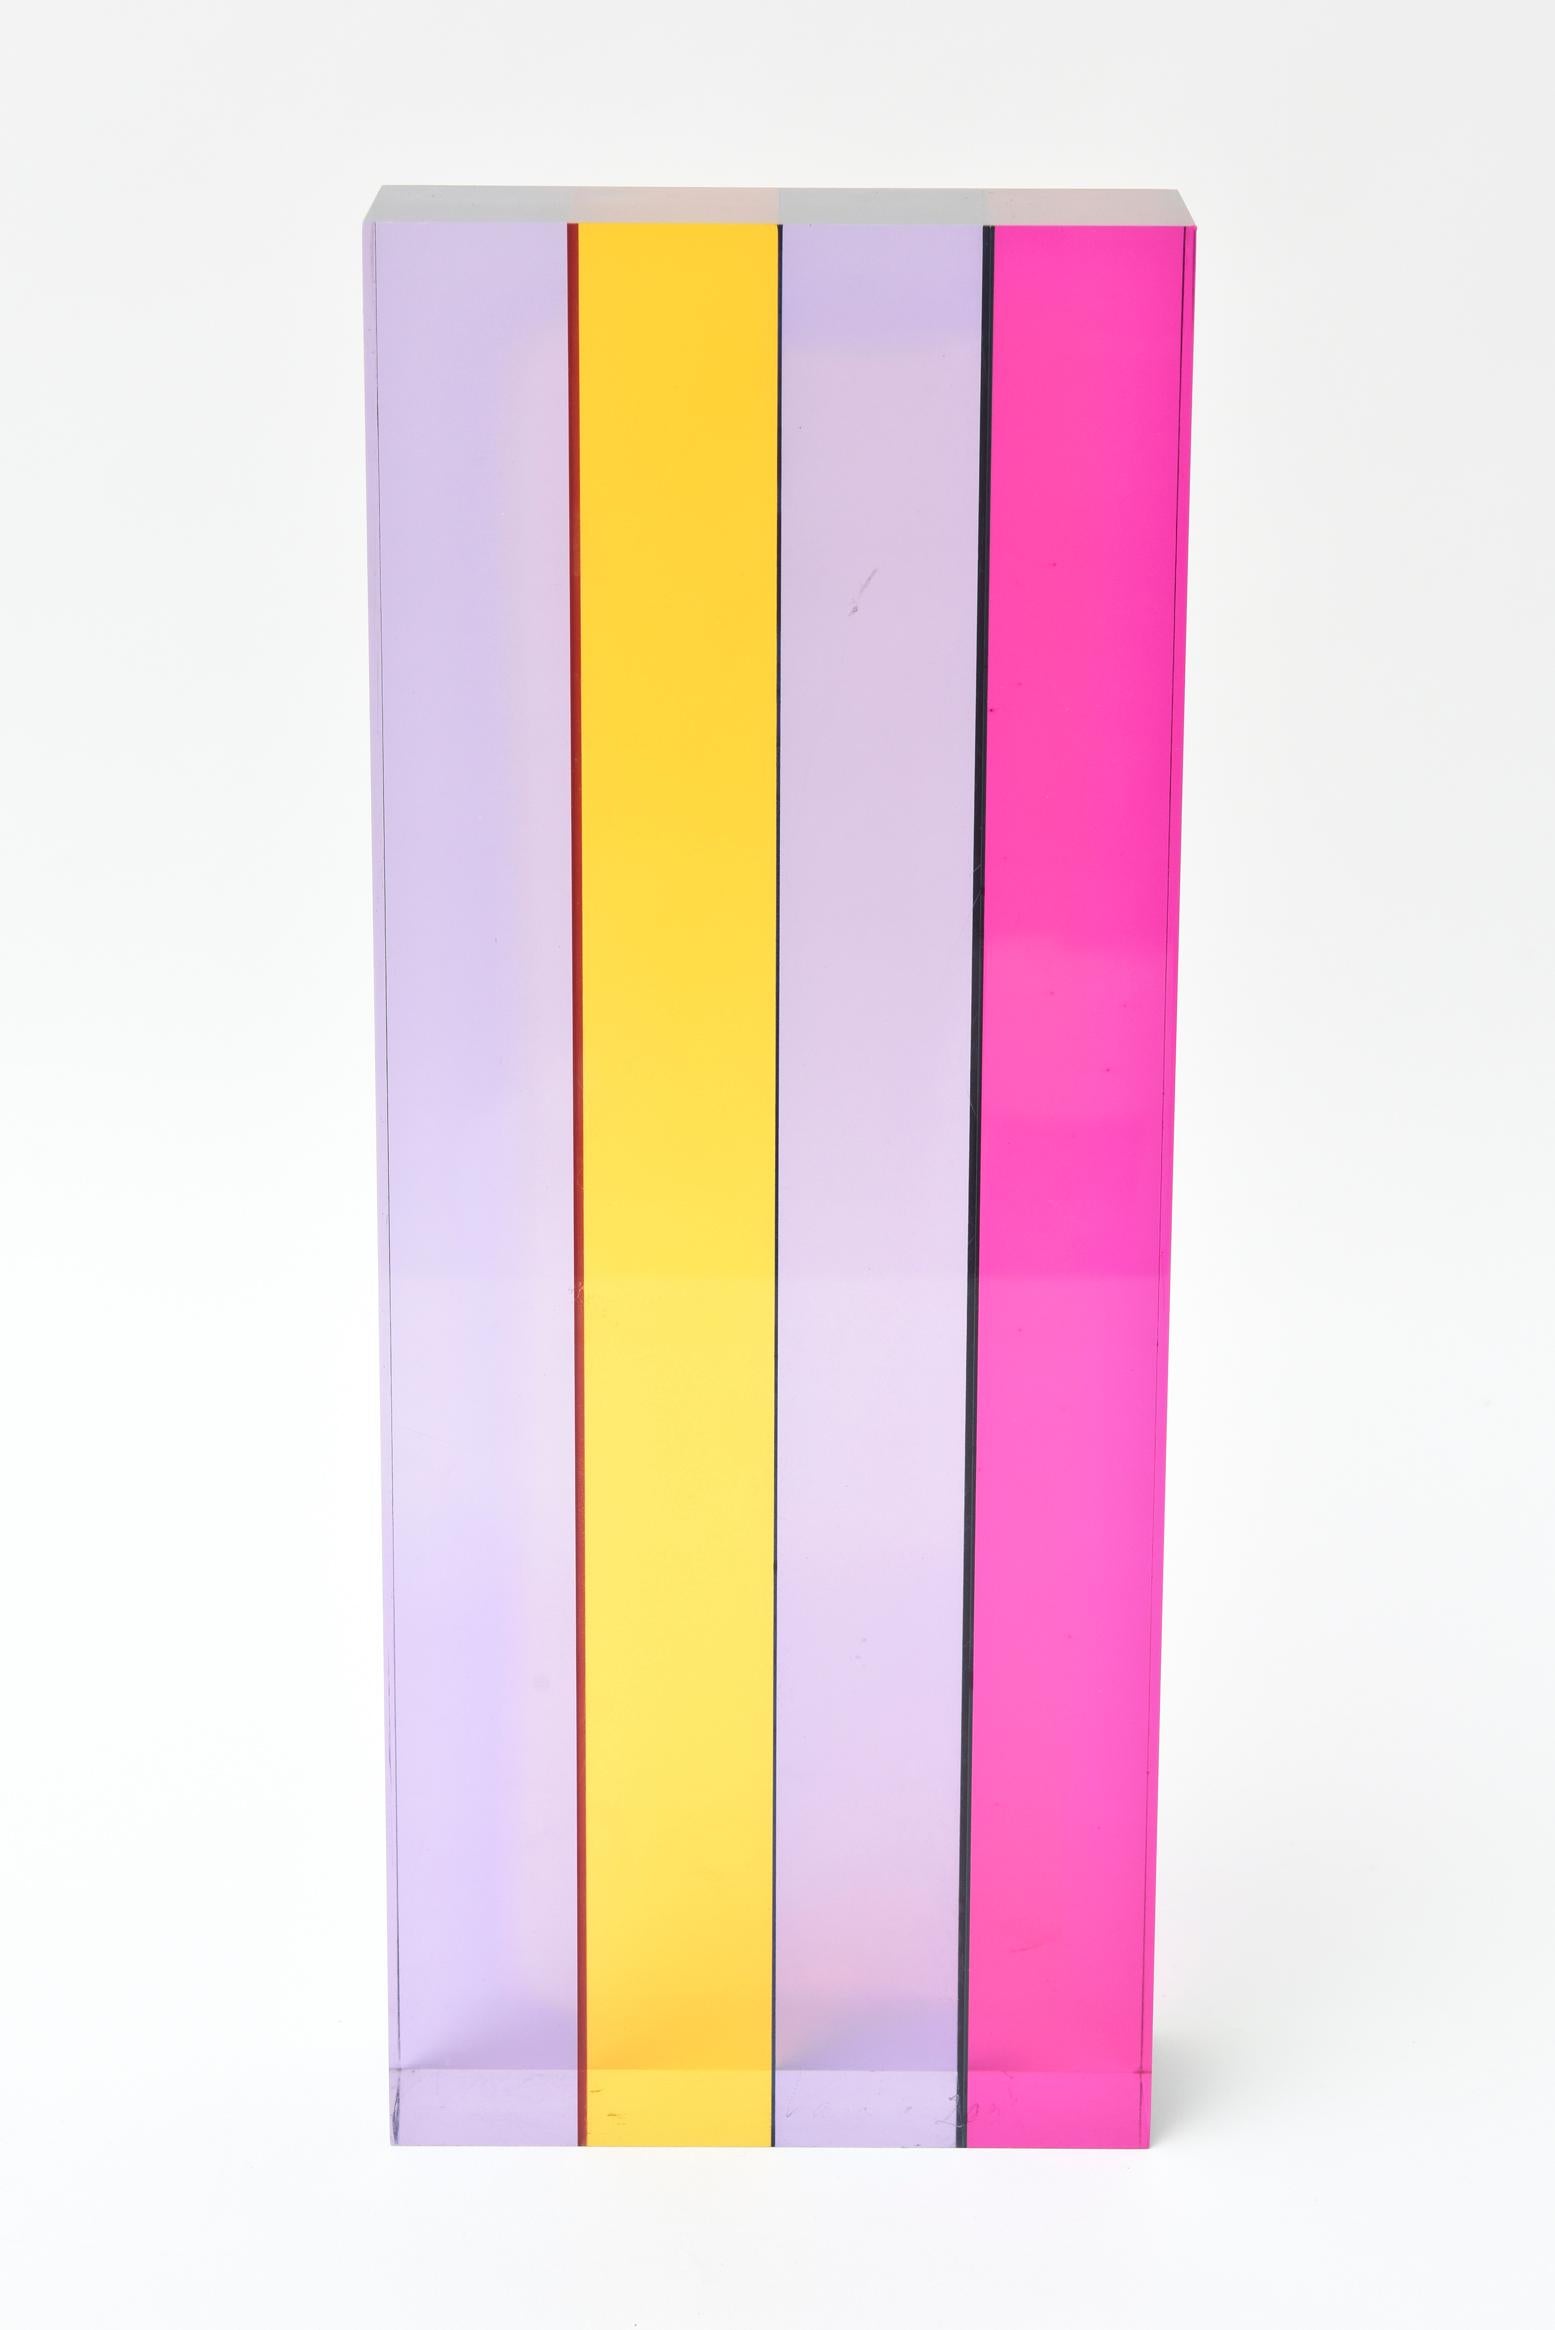 This amazing signed Vasa Mihich laminated Lucite tower sculpture has luscious layers of colored Lucite in juxtaposition. It is from 2001. Signed Vasa@2001. Each wonderful way you turn this tower sculpture it changes in color waves and blocks. The